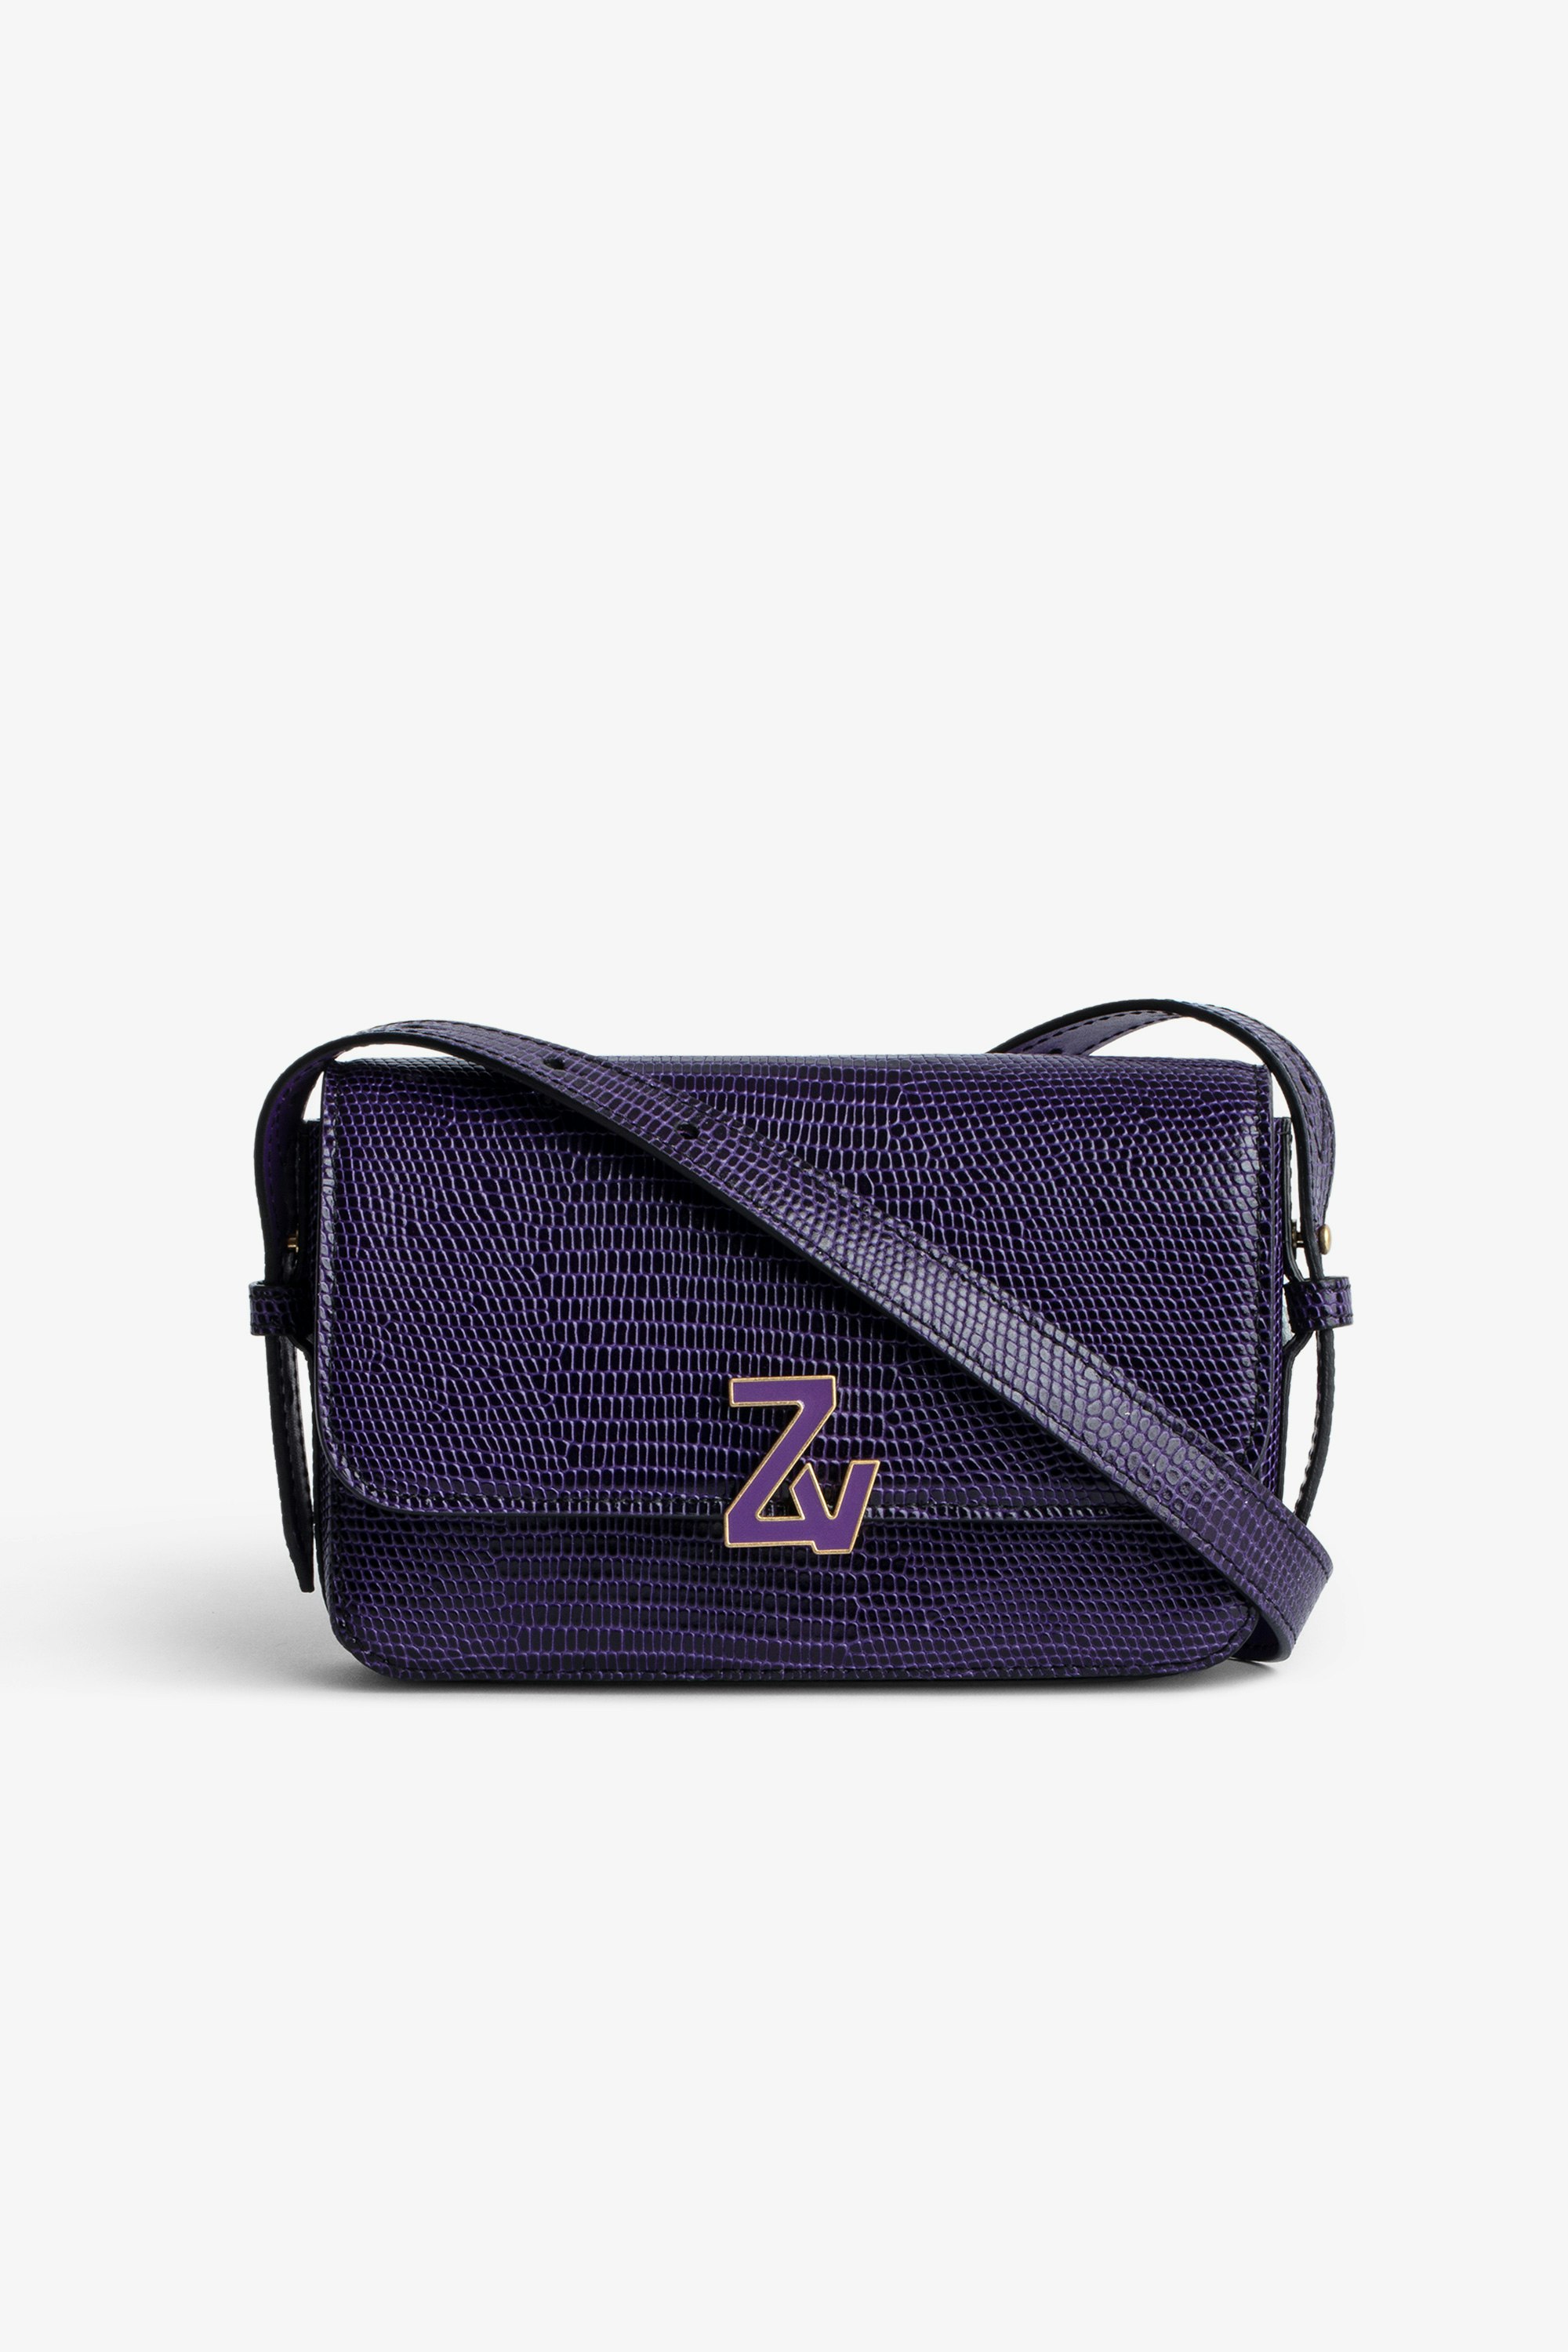 Le Mini ZV Initiale Bag undefined